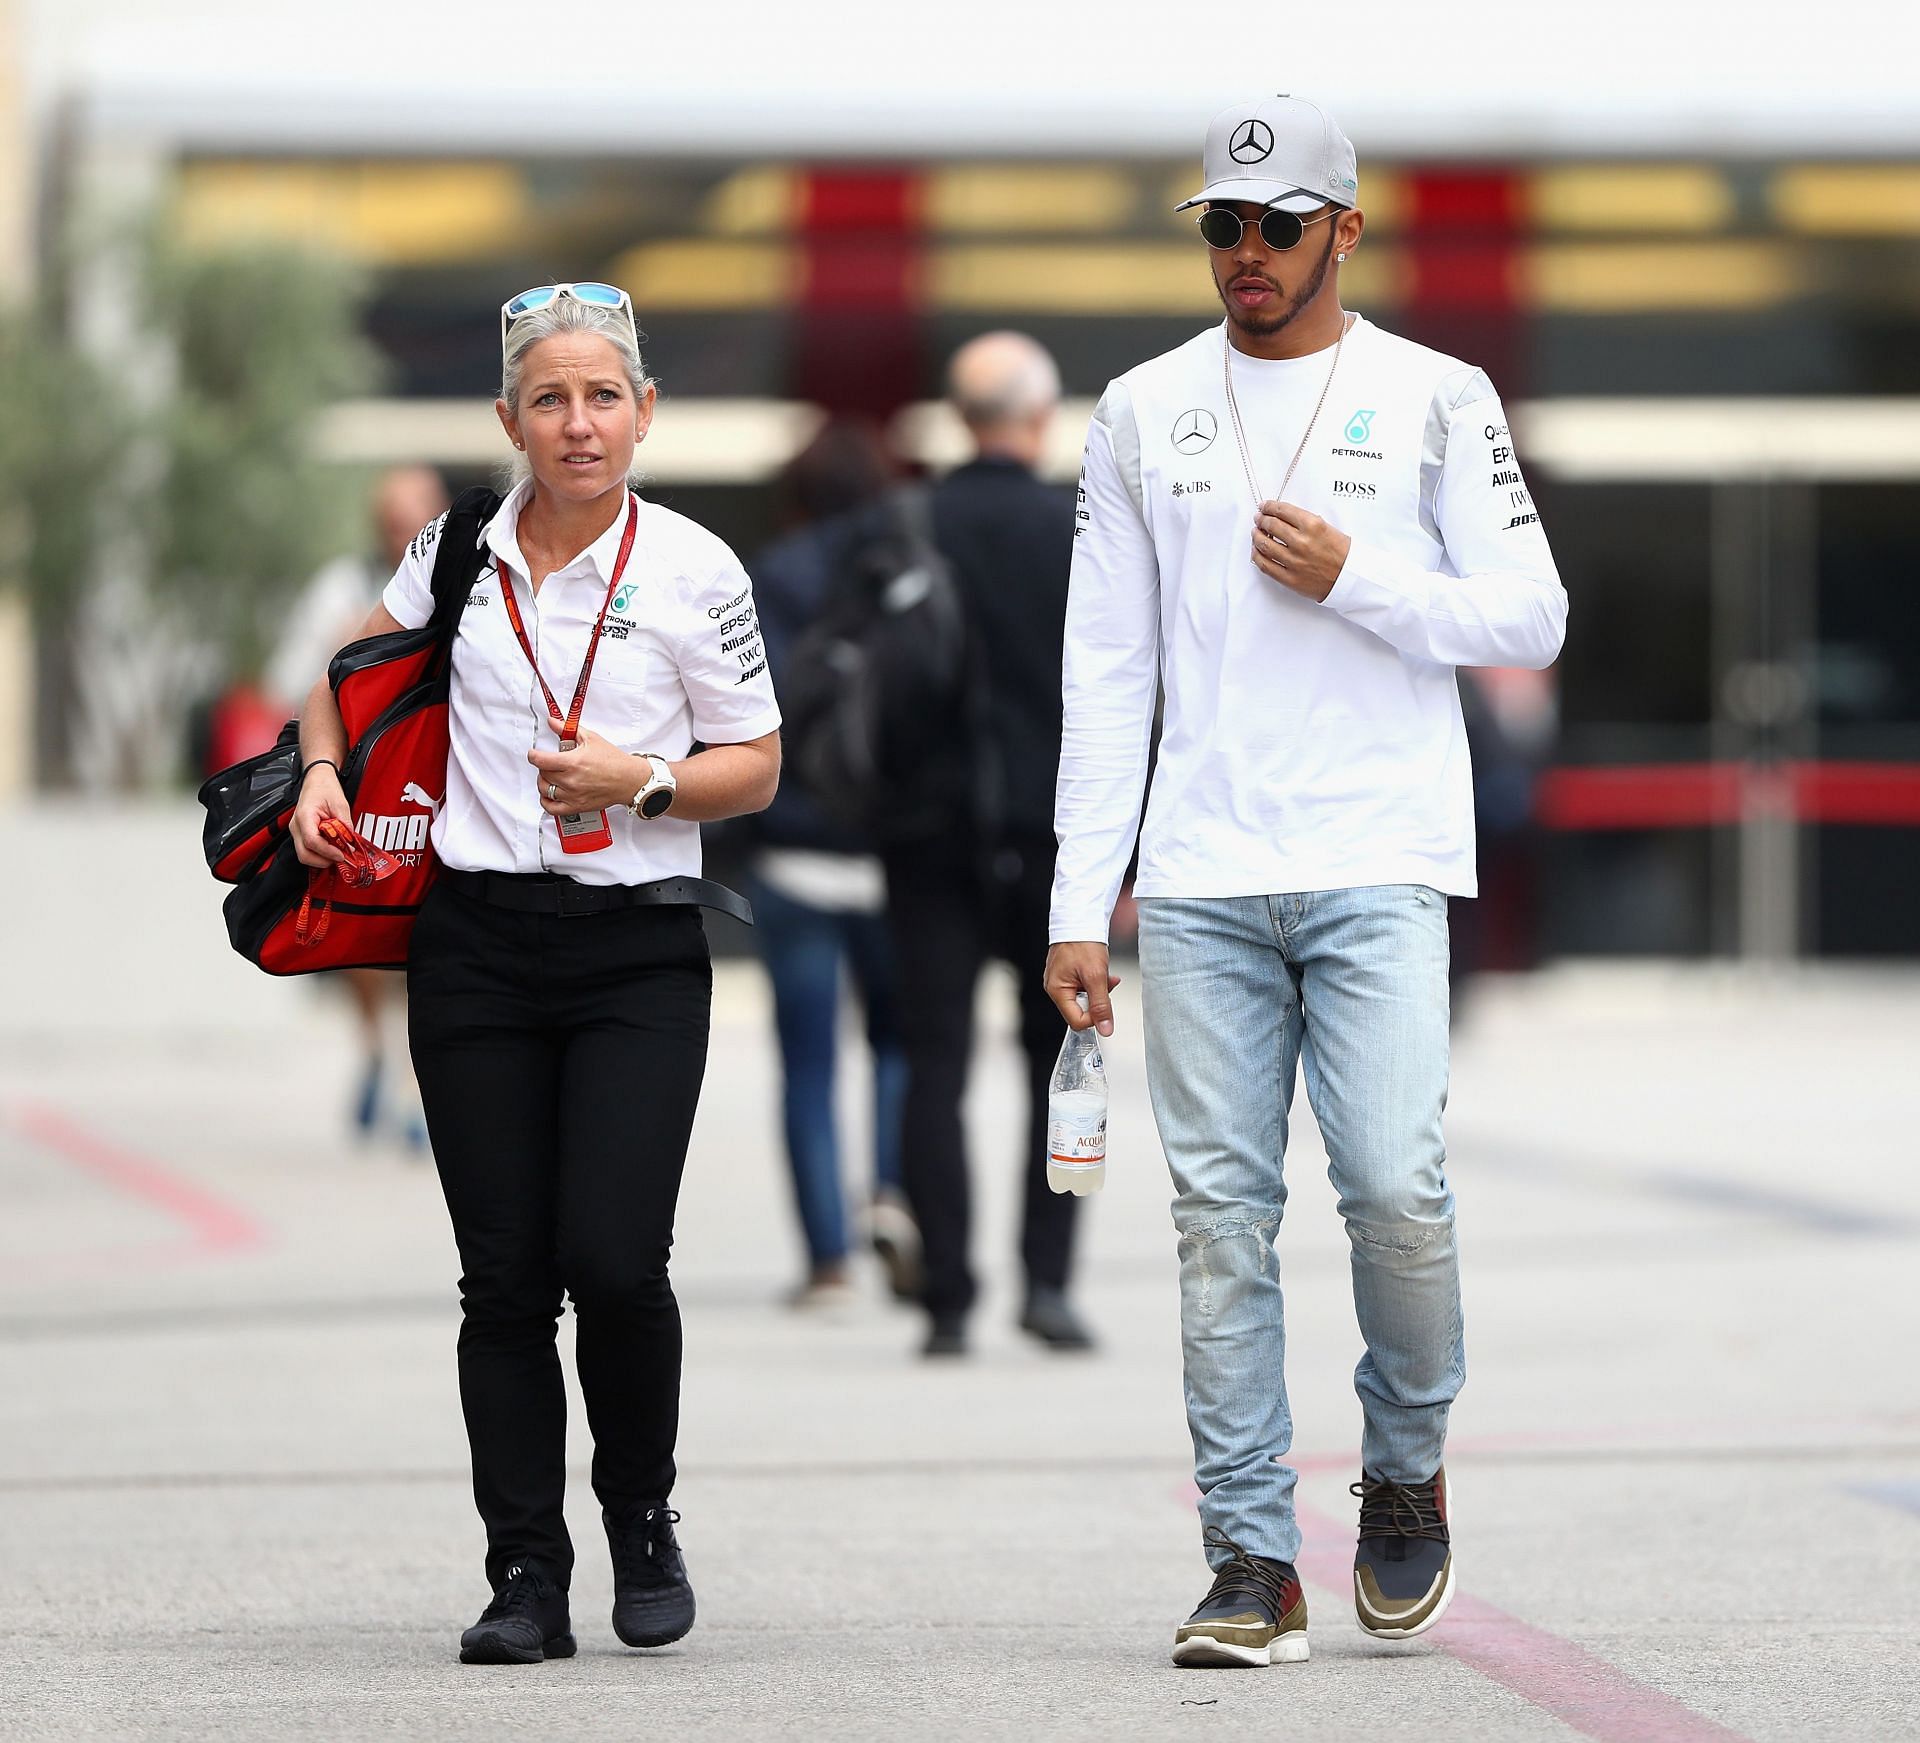 Angela Cullen (left) and Lewis Hamilton (right) (Photo by Clive Mason/Getty Images)